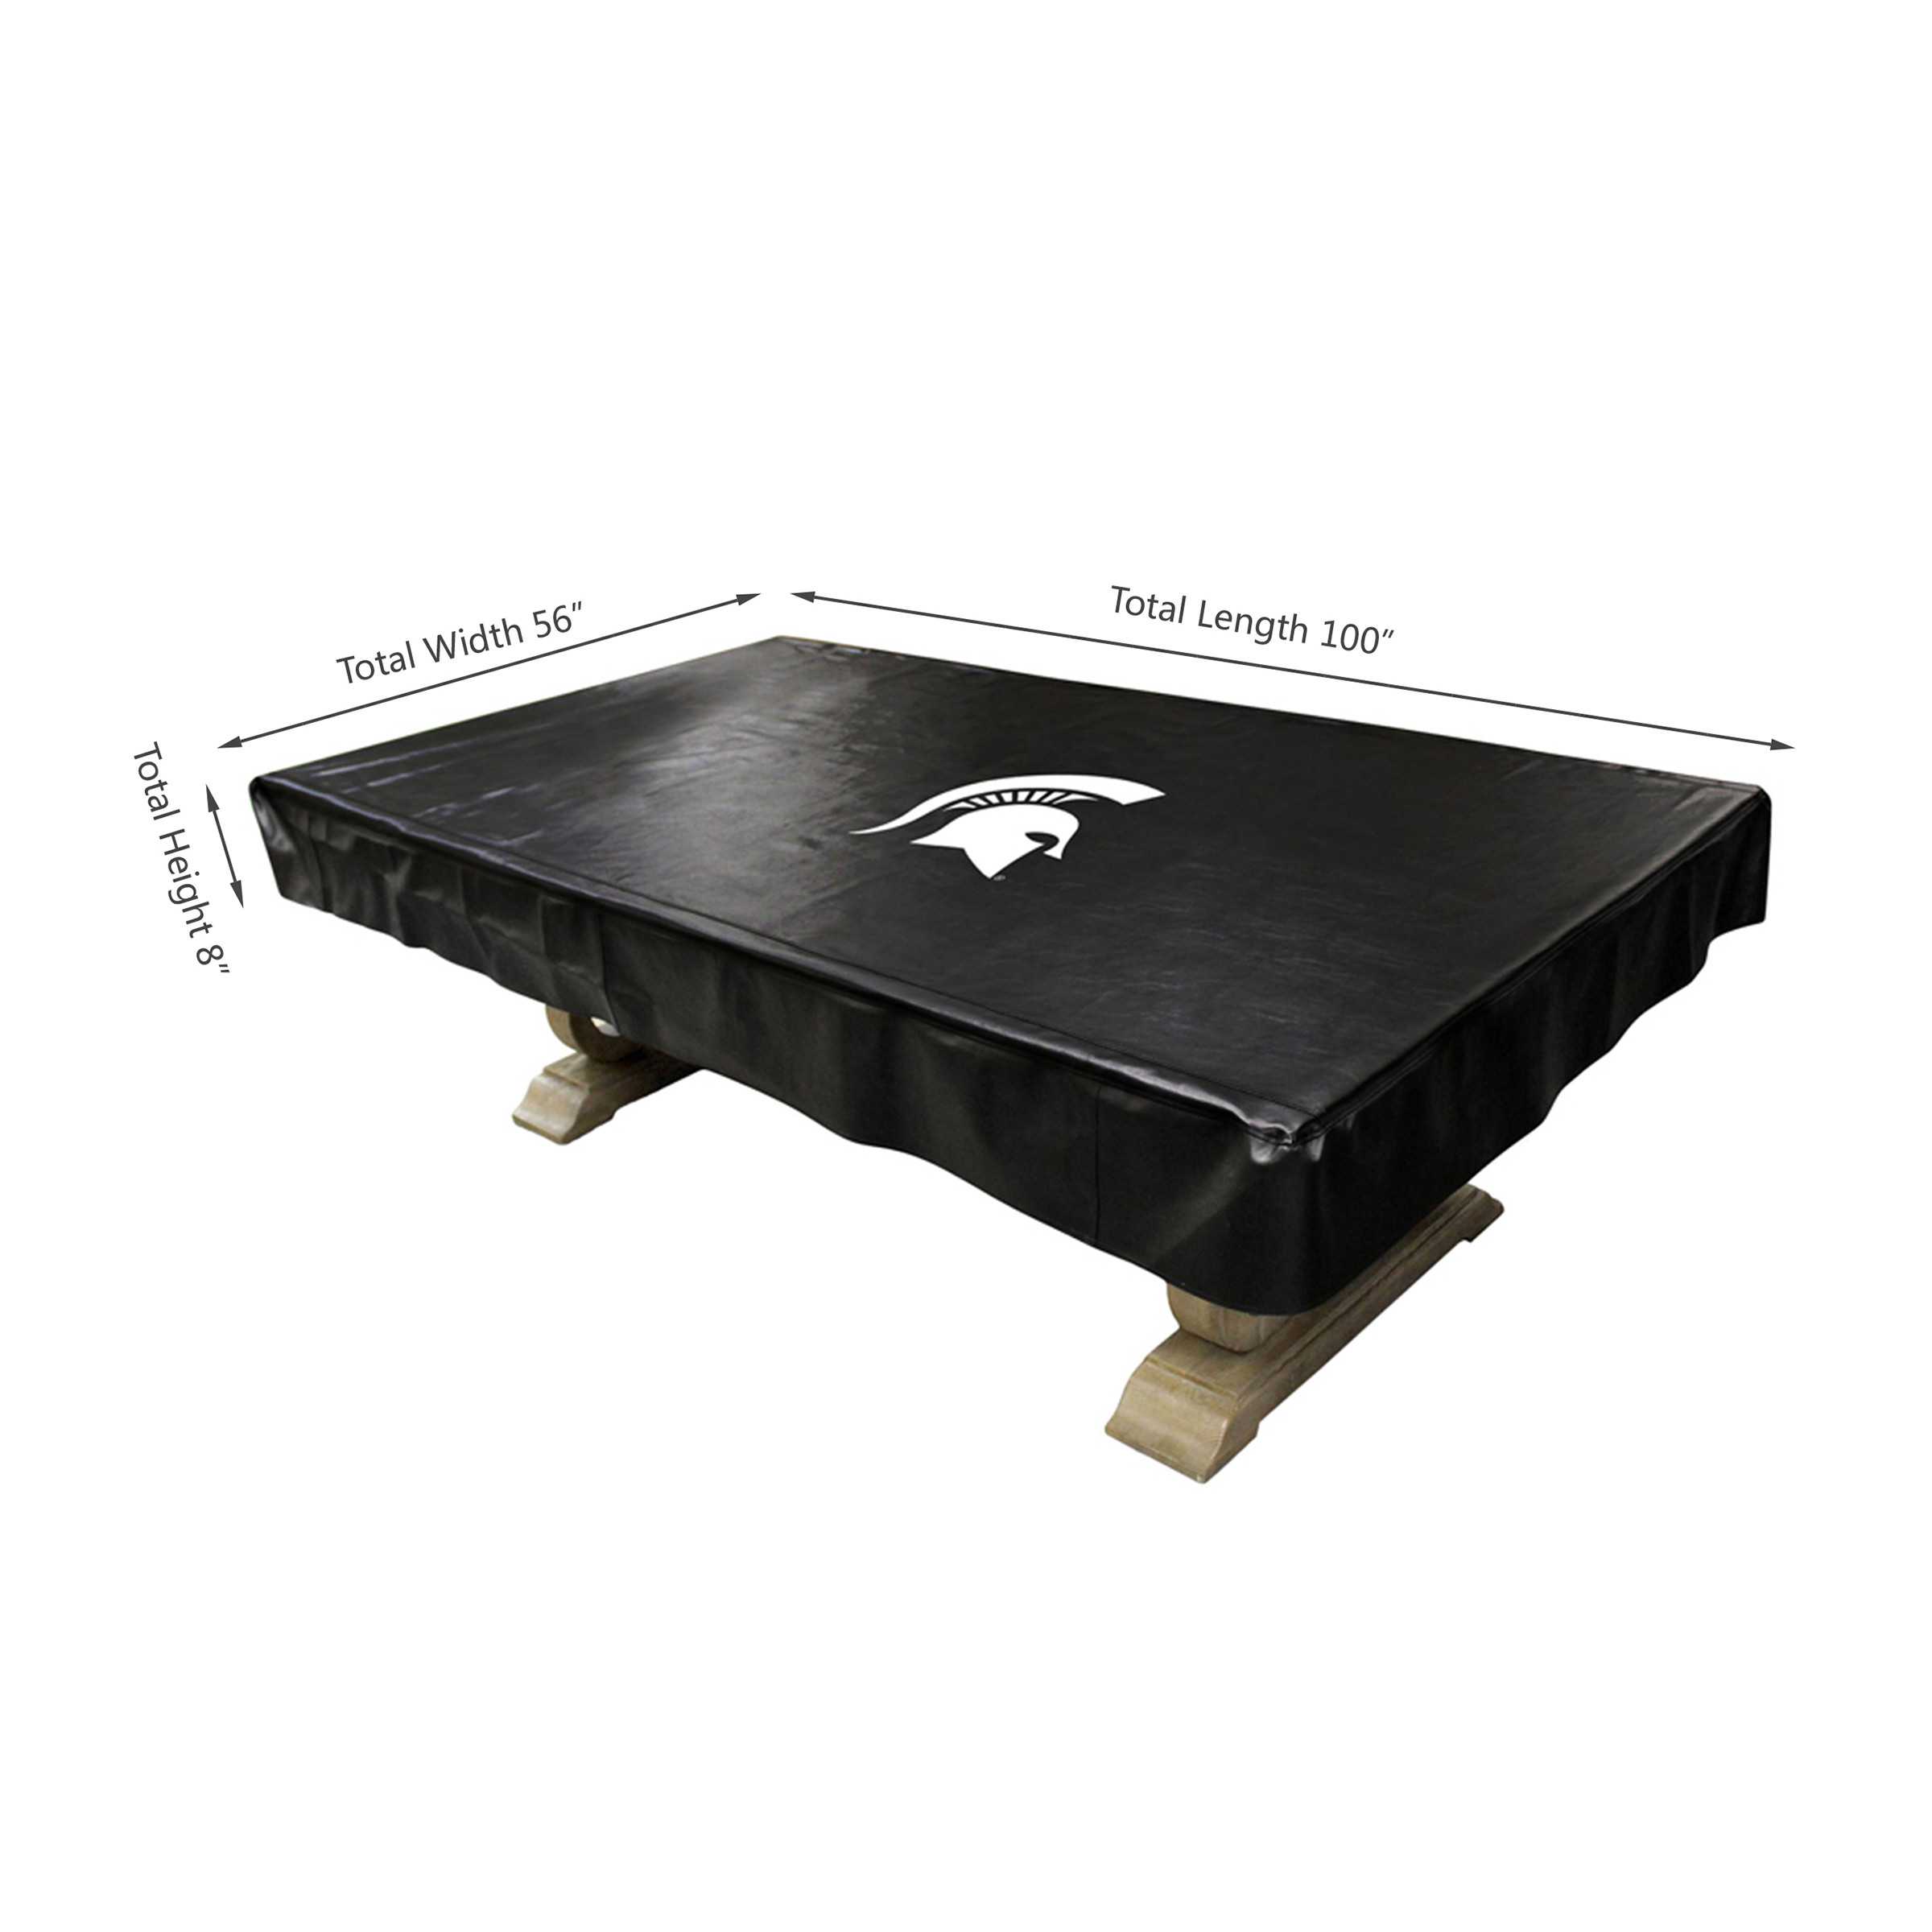 MICHIGAN STATE 8' DELUXE POOL TABLE COVER